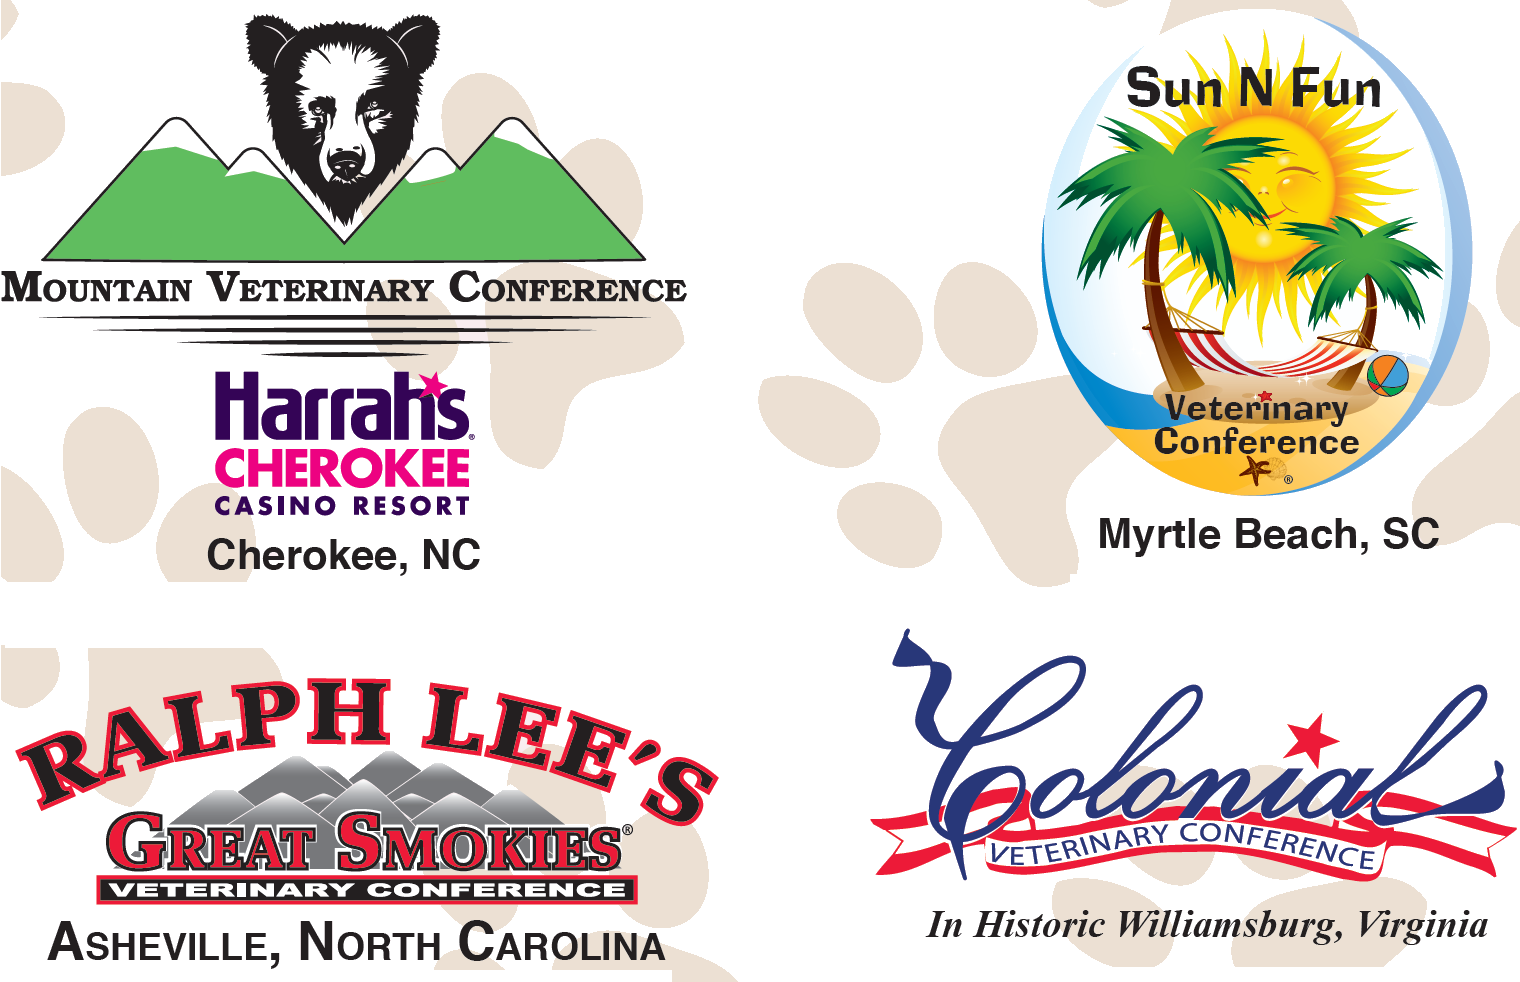 Our Conferences for 2020: Mountian Veterinary Conference, Sun N Fun Veterinary Conference, Ralph Lee's Great Smokies Veterinary Conference and Colonial Veterinar Conference